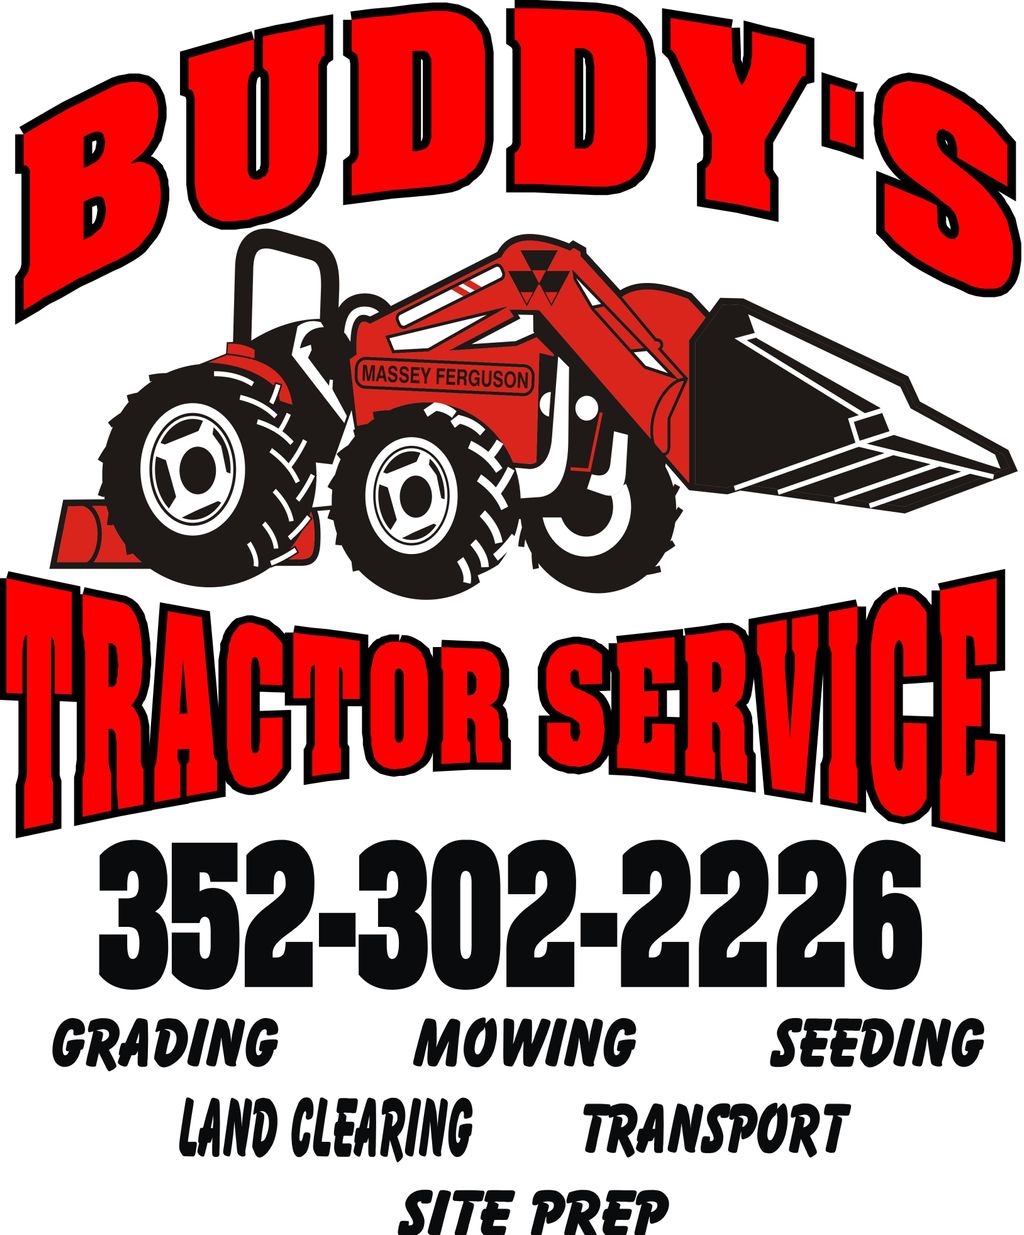 Buddy's Tractor Service